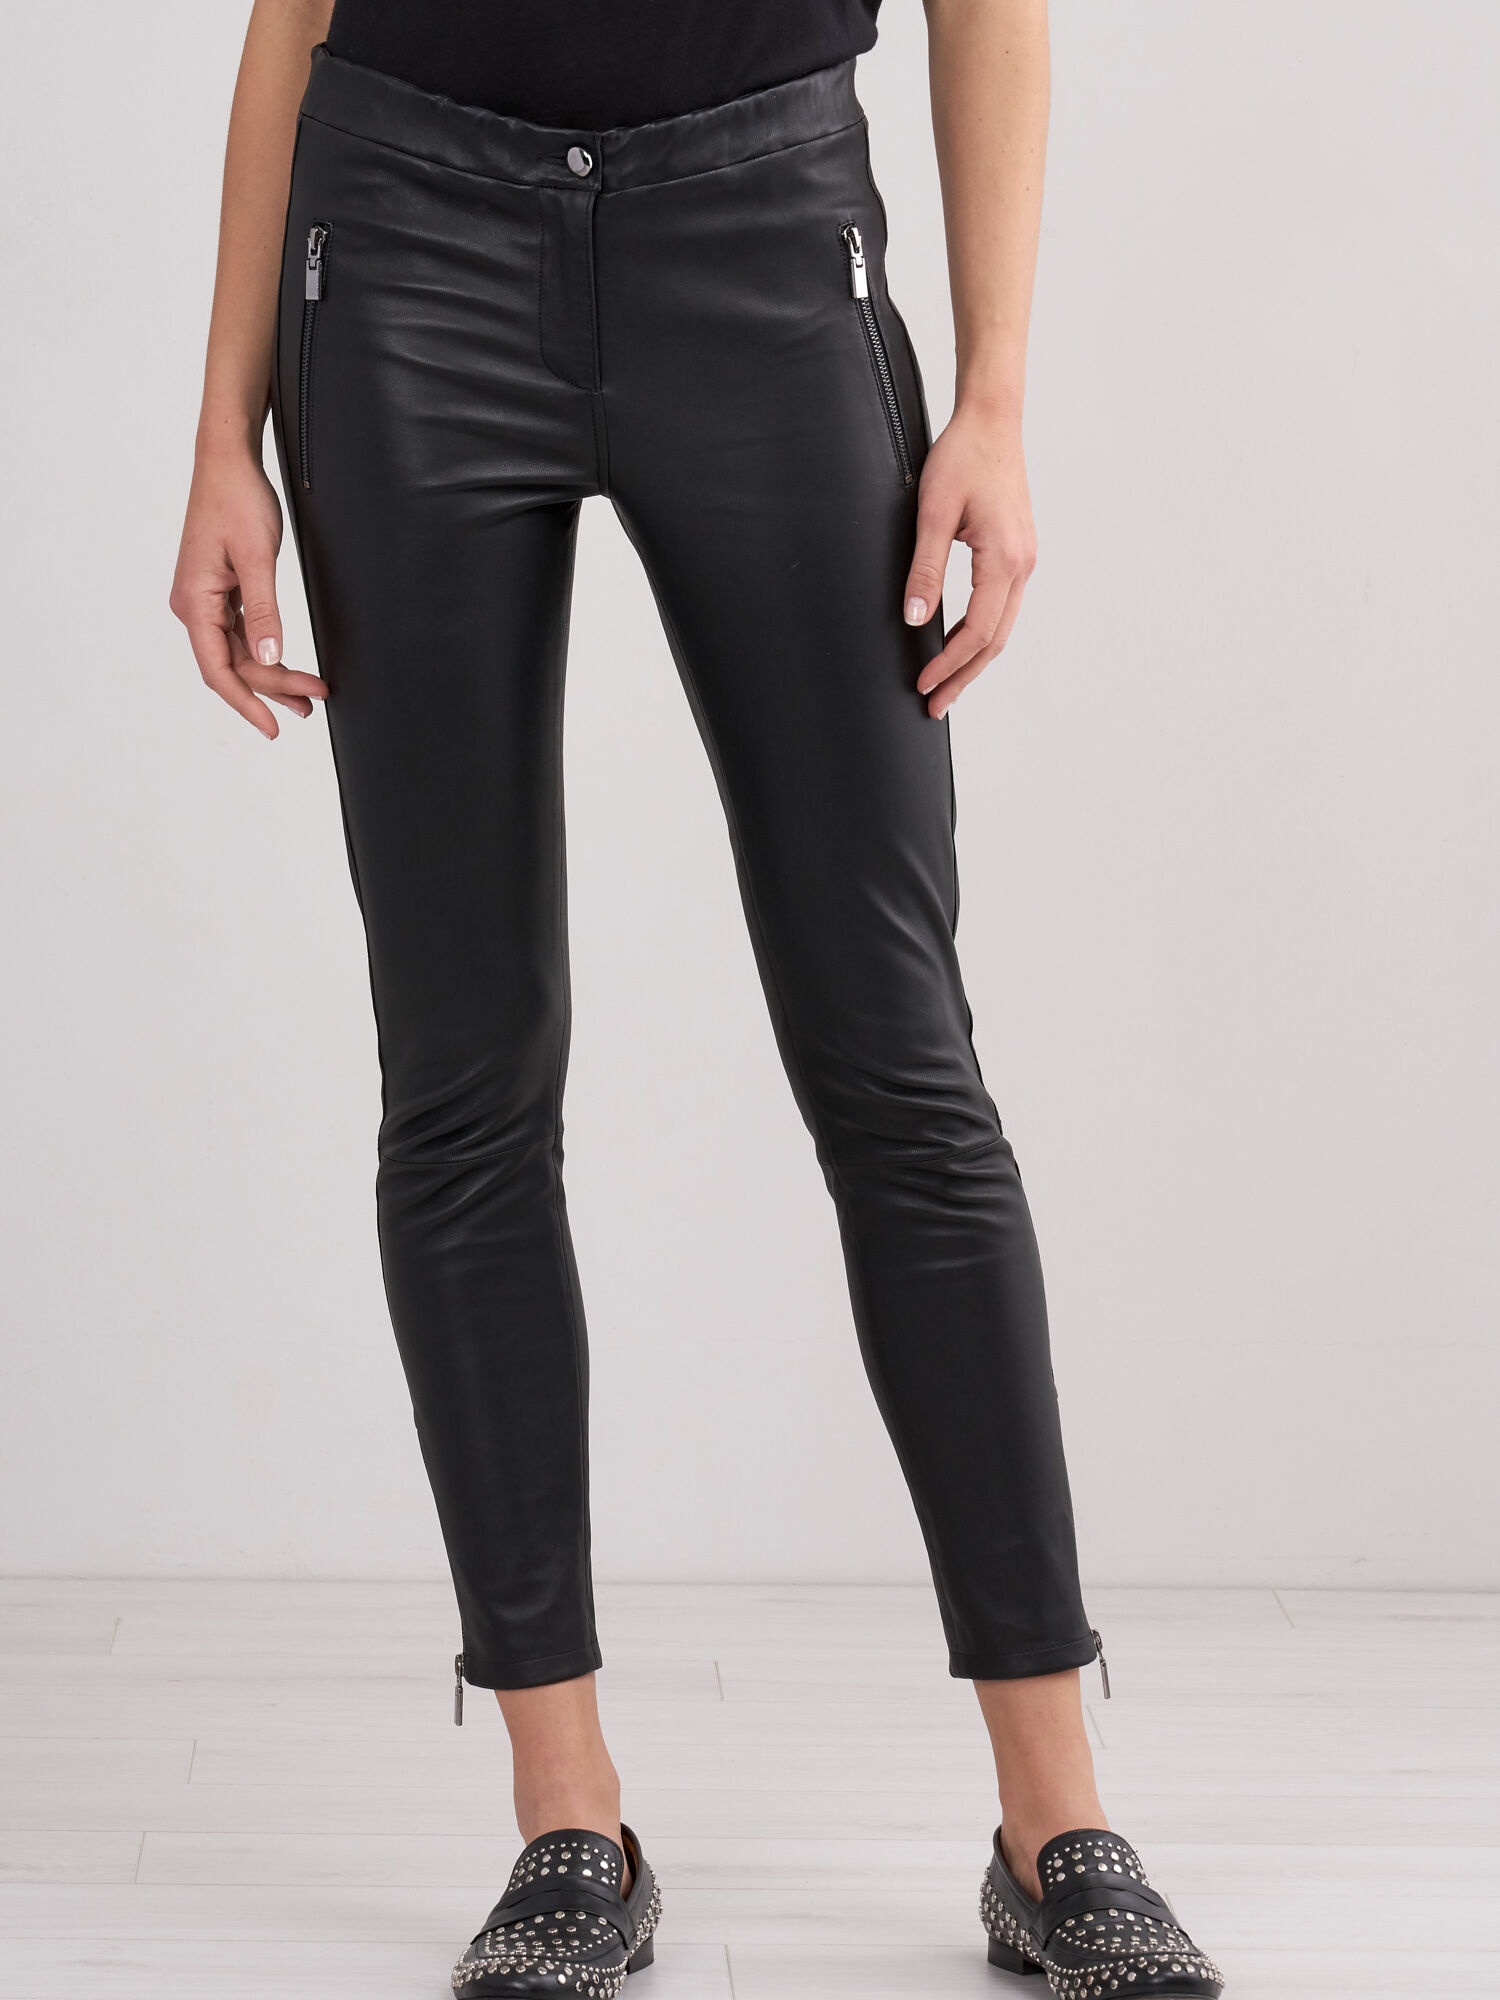 Buy Faux Leather Pants Women Online In India  Etsy India